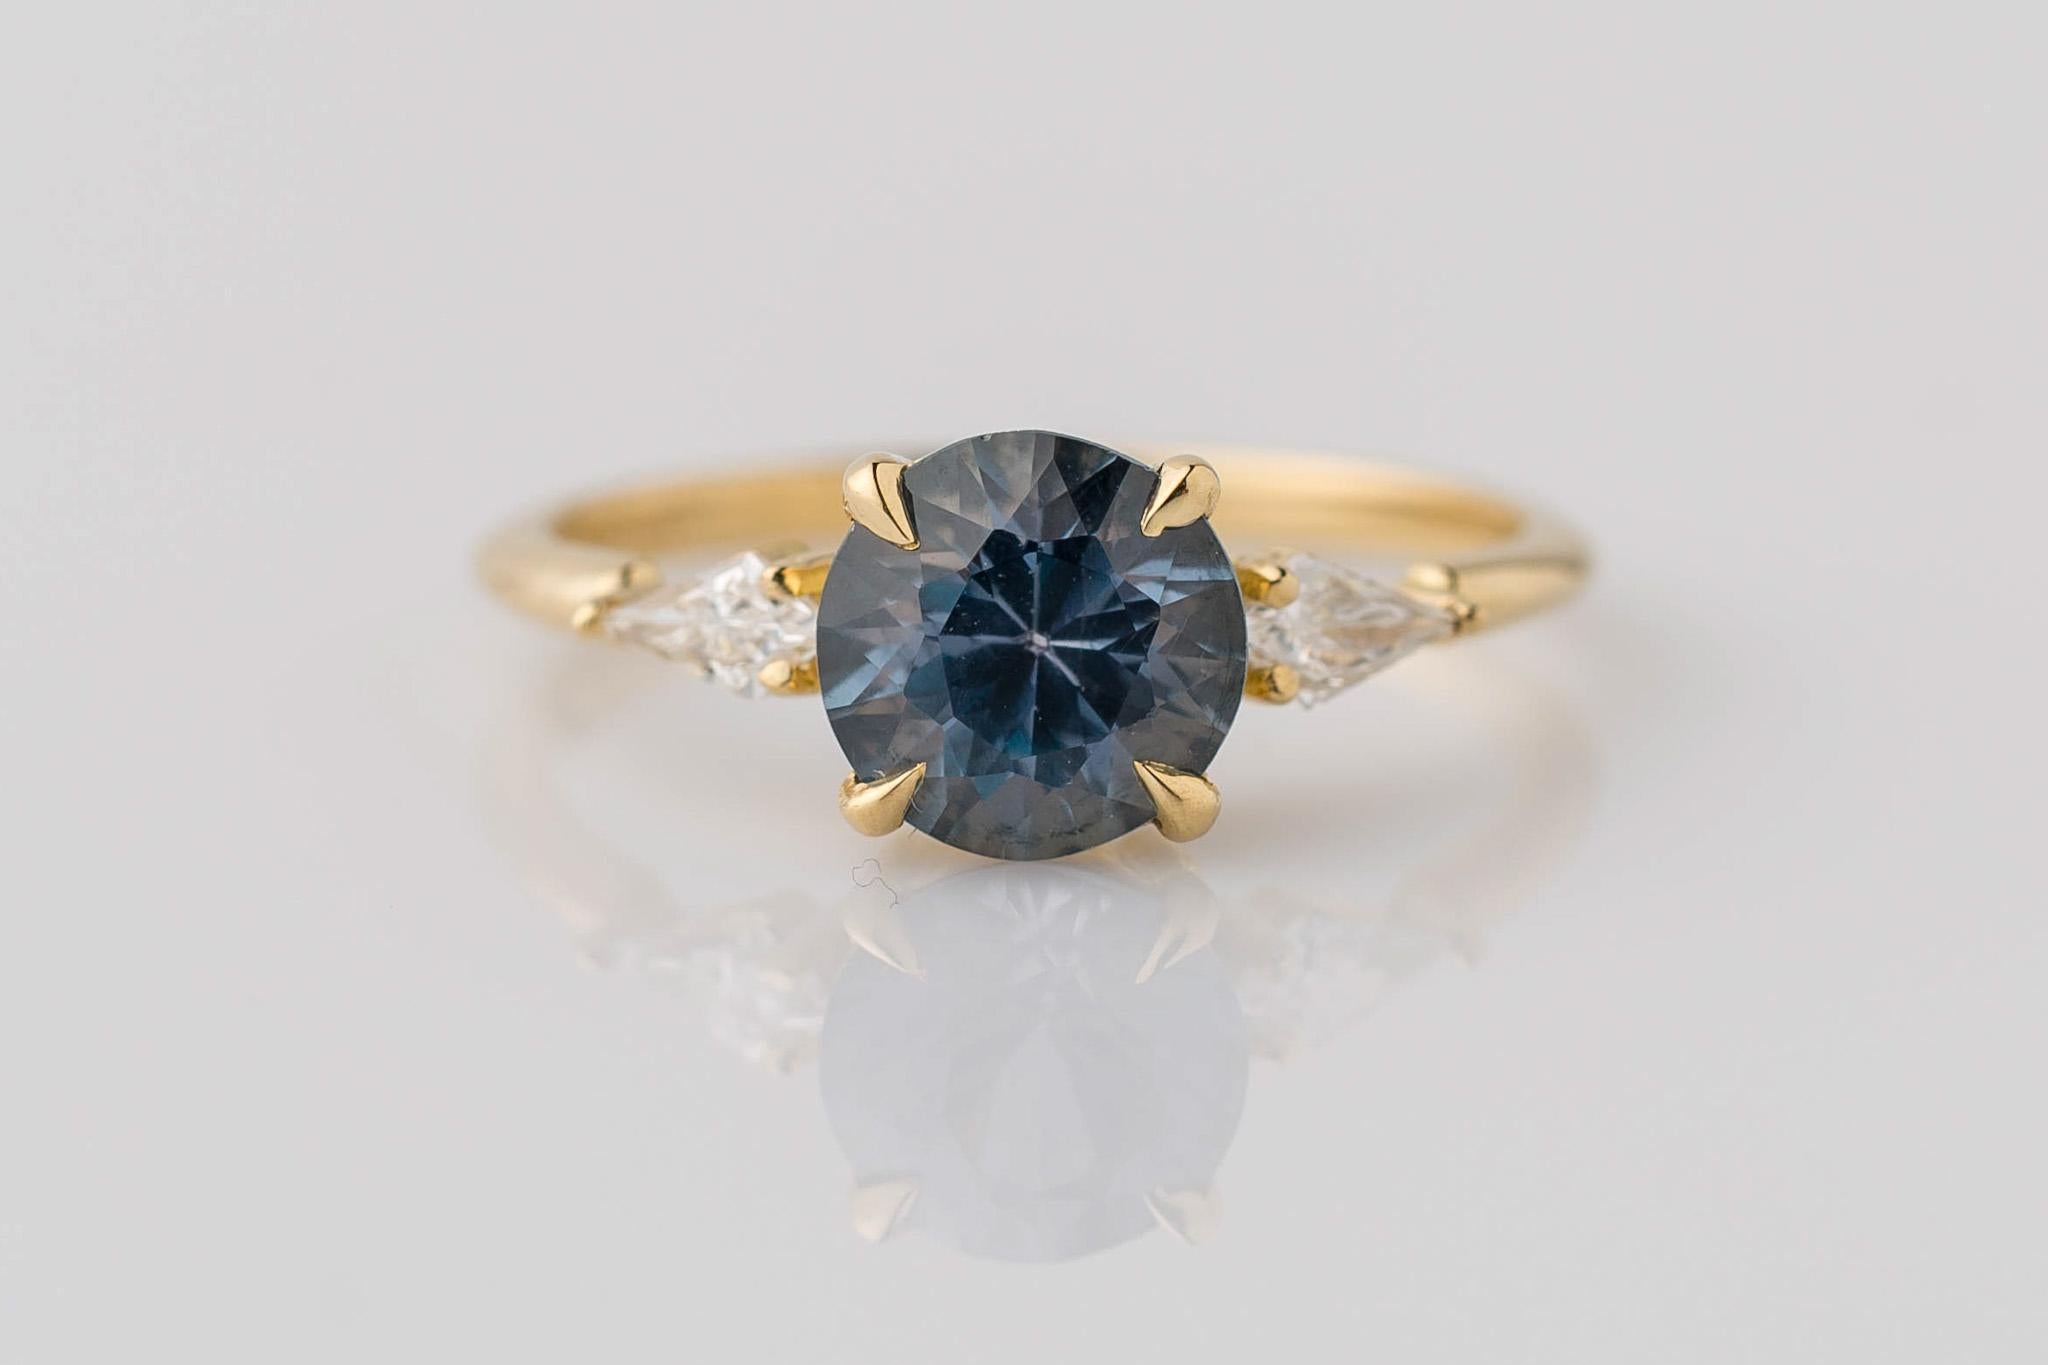 Capture the enchantment of changing hues with our 18K Yellow Gold Montana Color-Changing Sapphire 3-Stone Ring. The centerpiece, an ultra-rare natural untreated Montana sapphire weighing 1.65 carats, exhibits a mesmerizing shift from gray-blue to